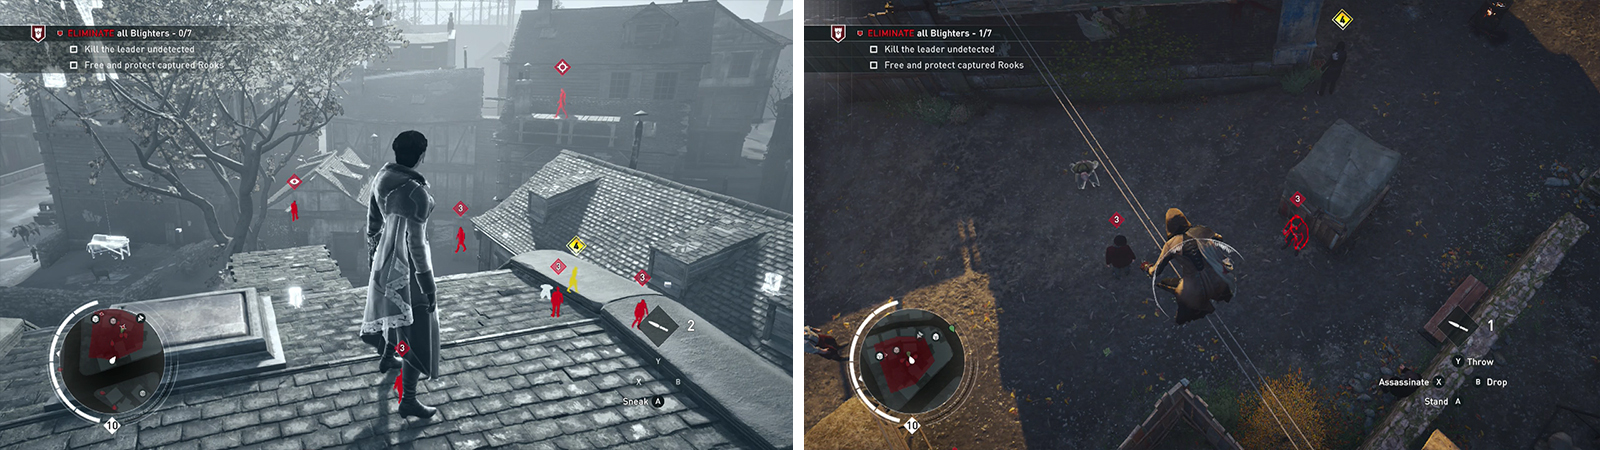 Use Eagle Vision to mark the enemies (left). The leader can be found by the captured Rook (right).